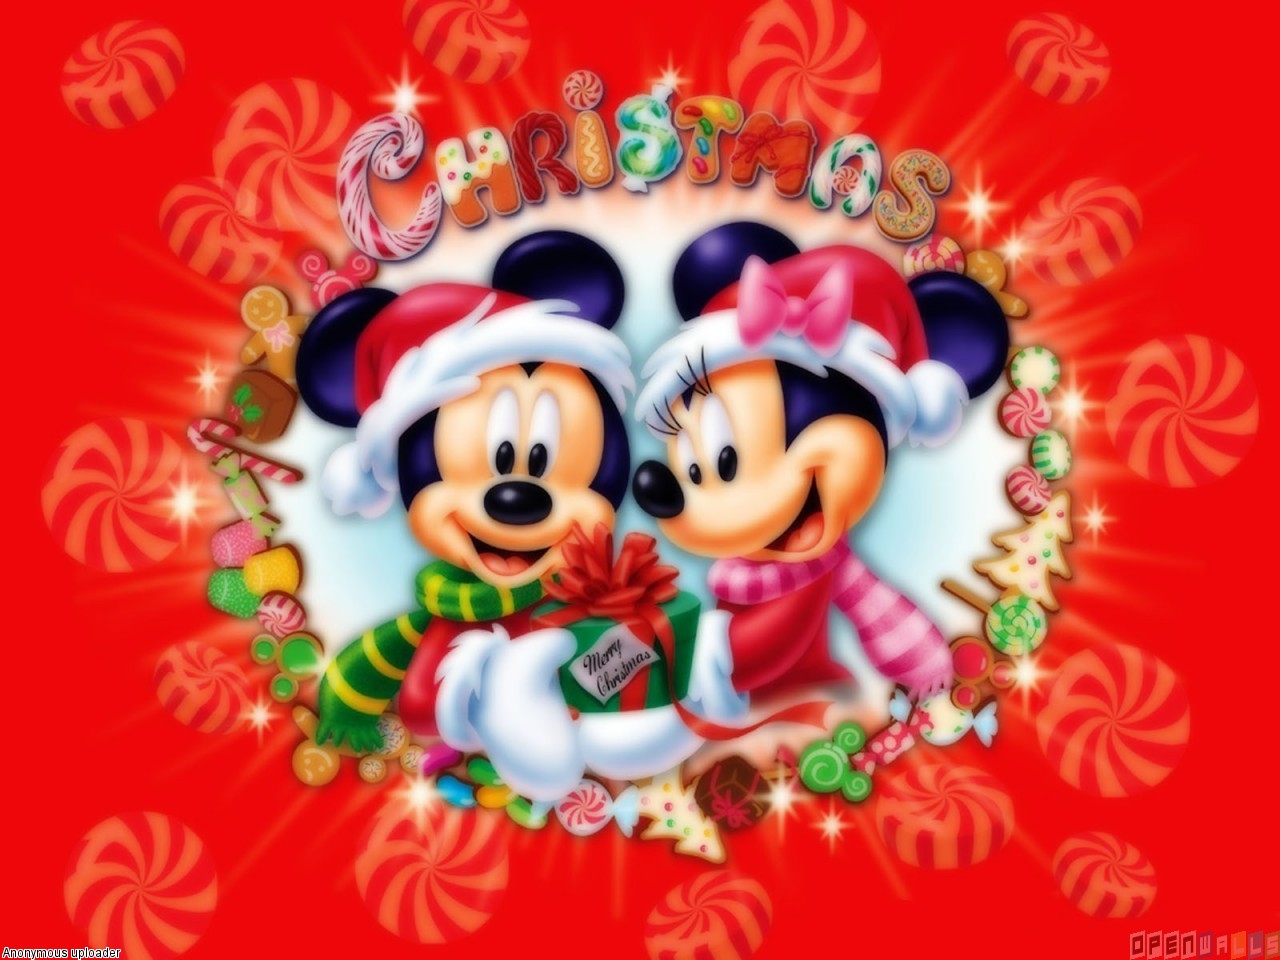 Minnie and mickey mouse on christmas wallpaper 20856   Open Walls